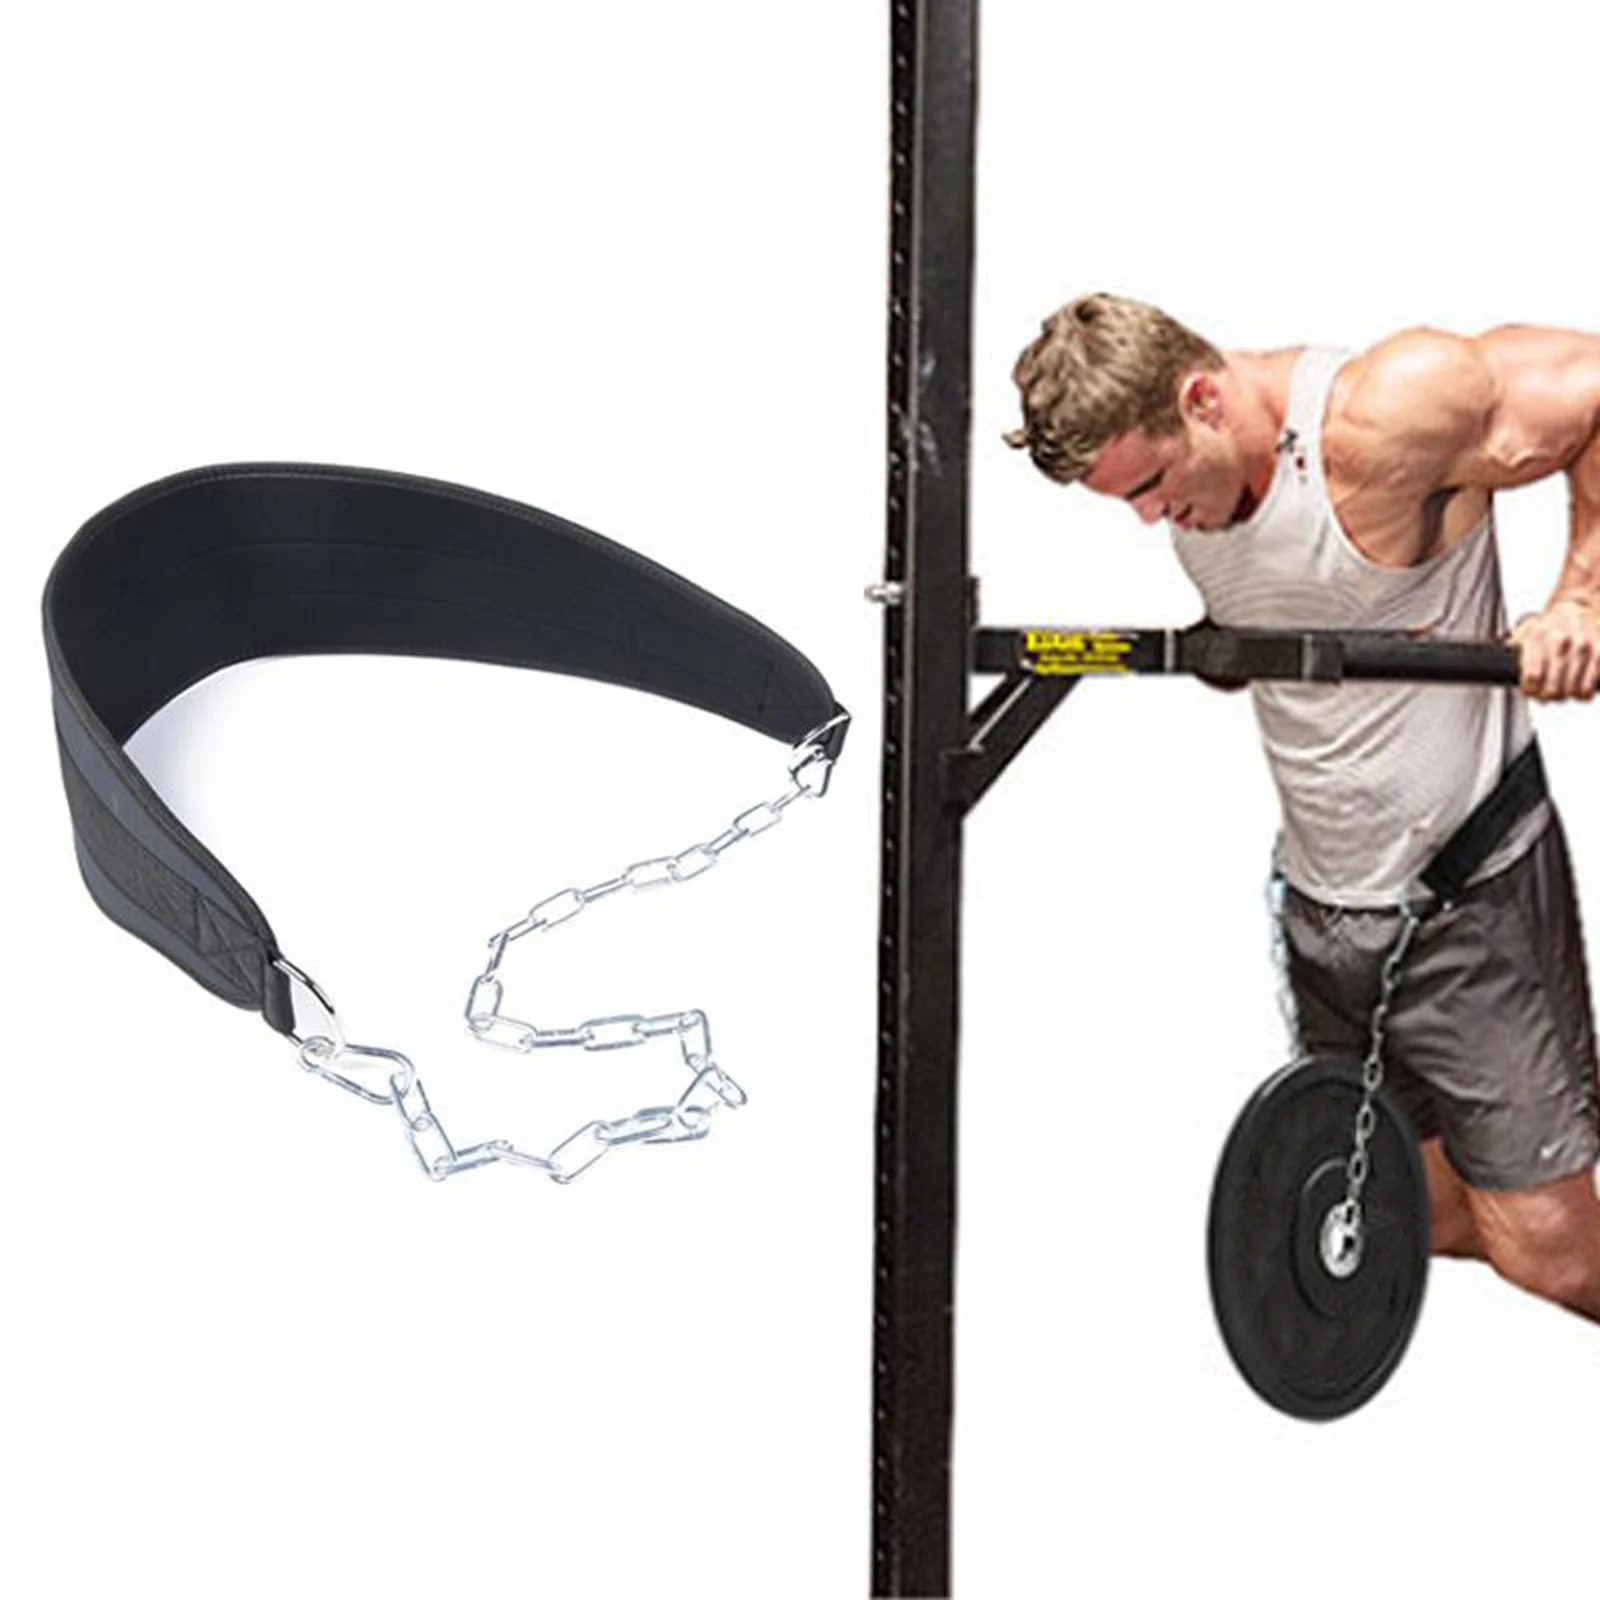 WEIGHT LIFTING BELT GYM BACK PULL UP CHAIN DIPPING DIP BODY BUILDING WORKOUT 